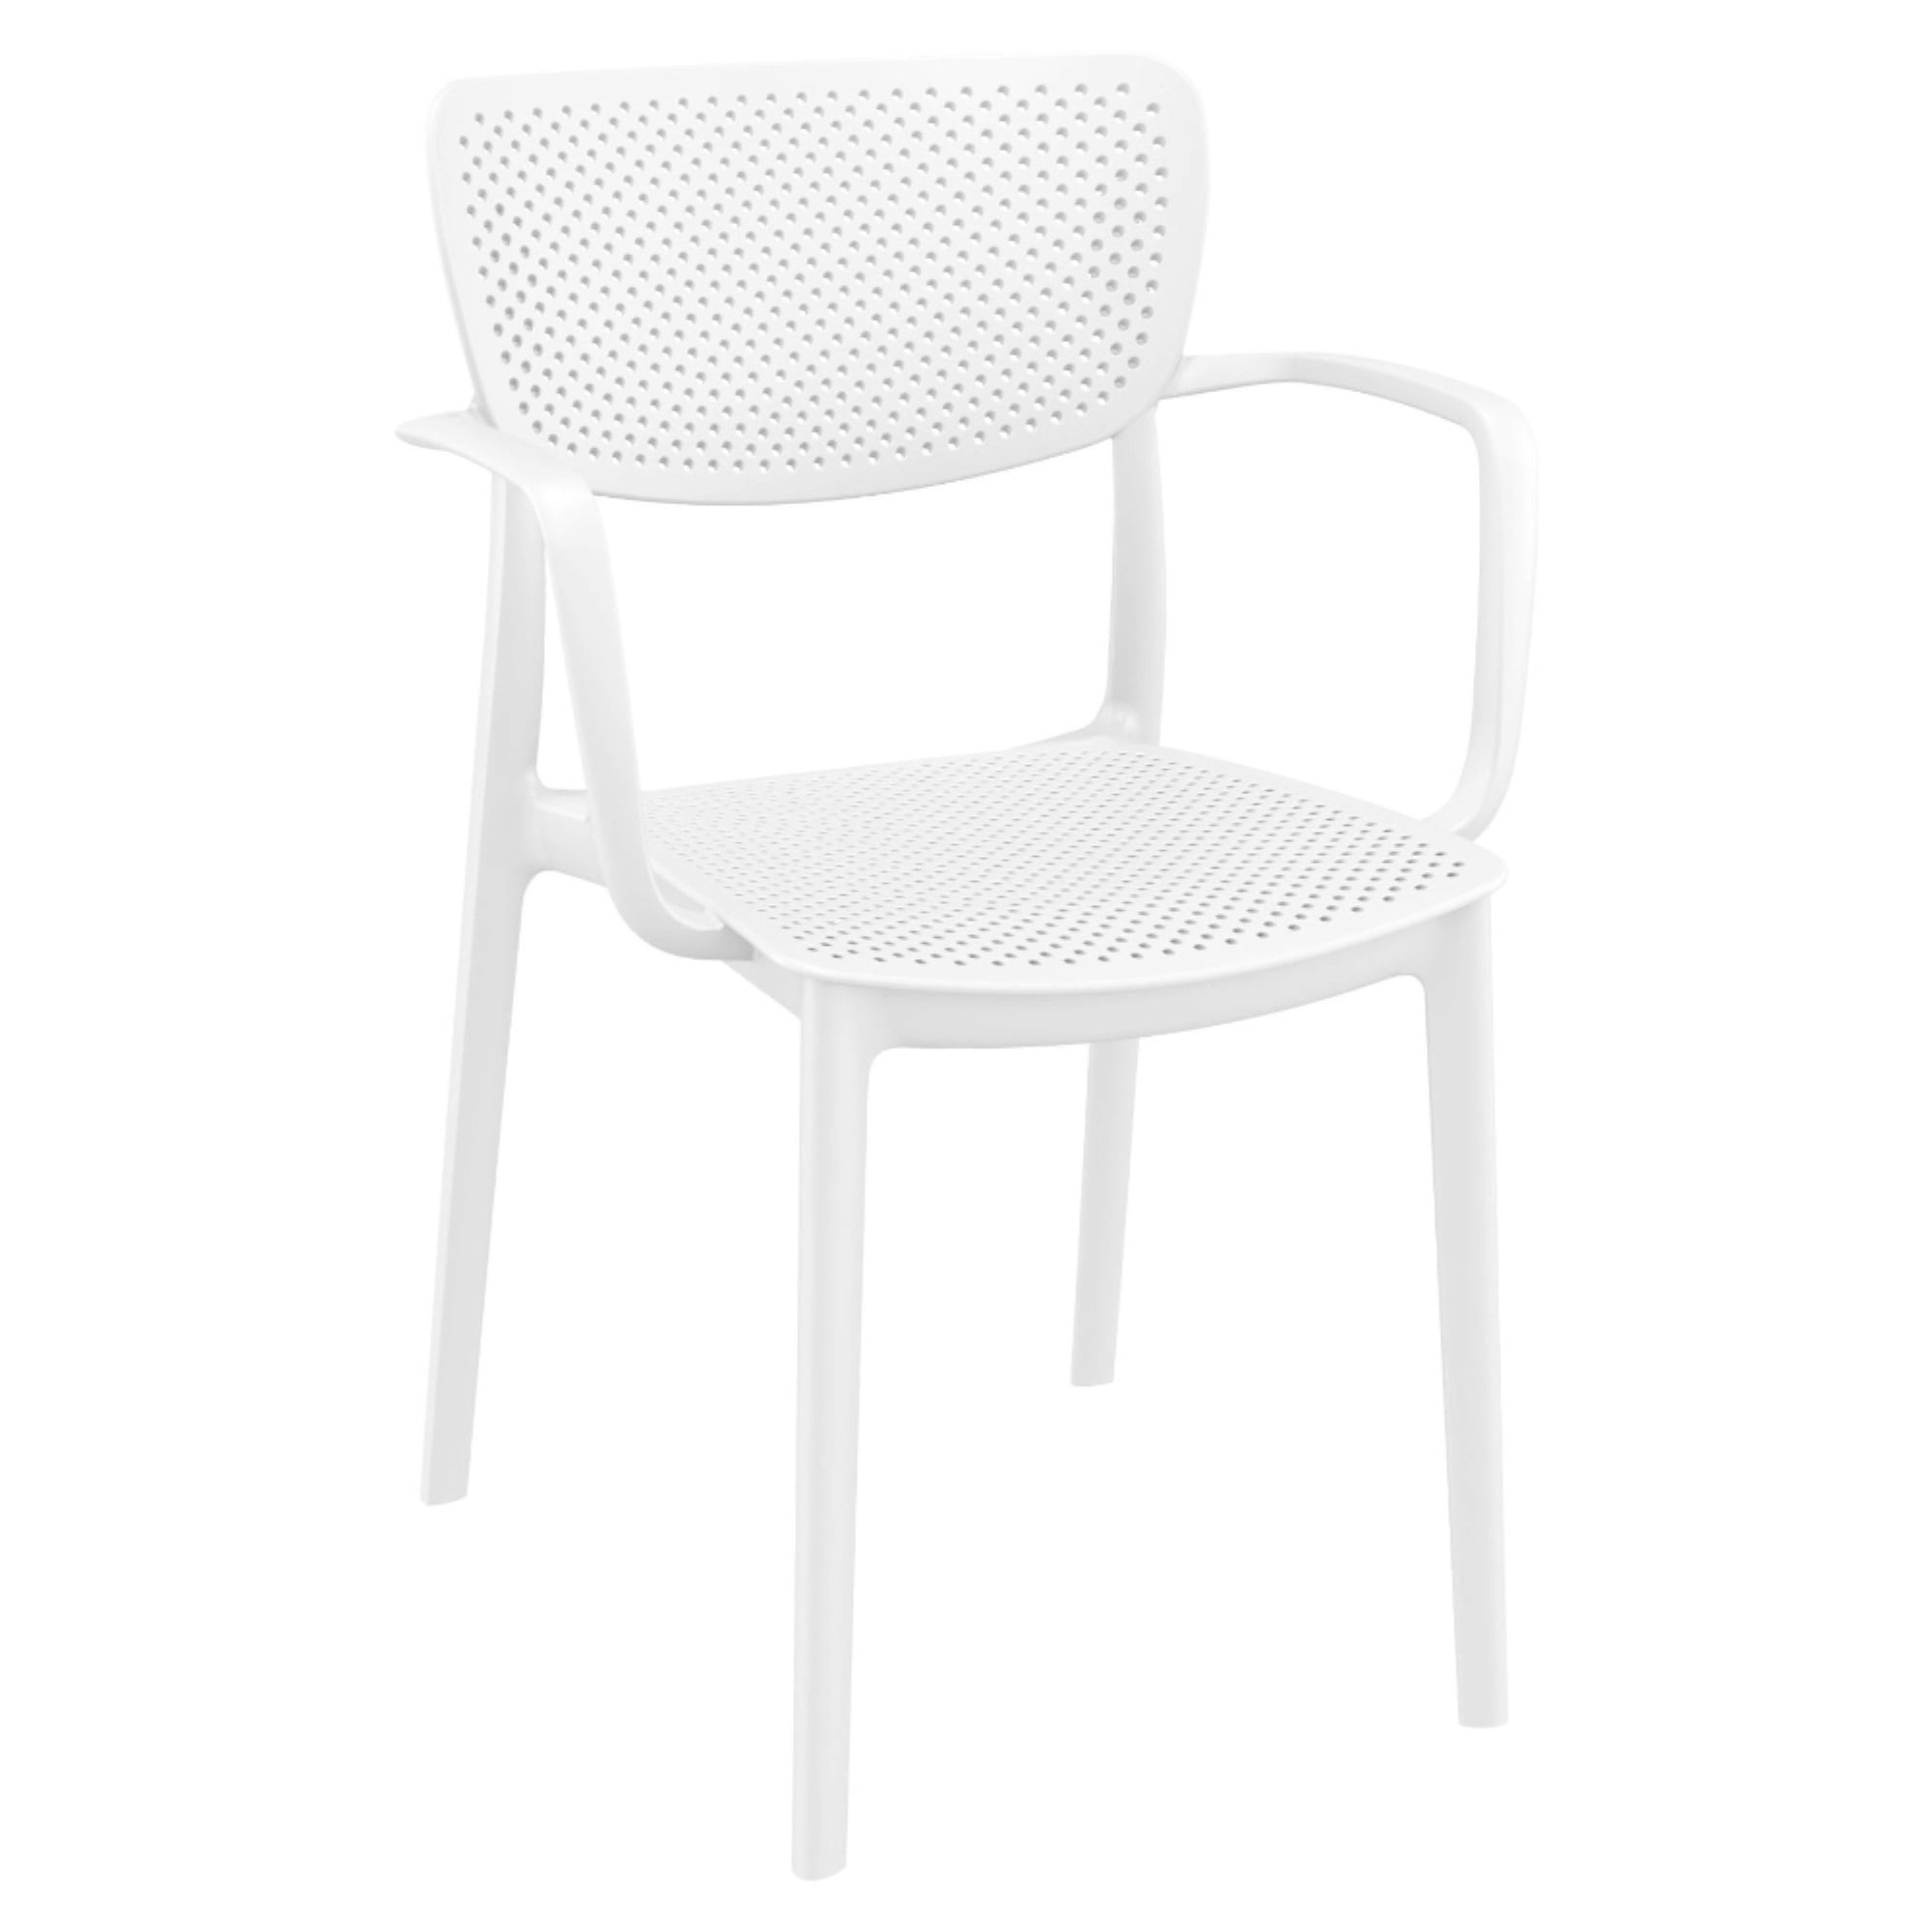 Isp128-whi Loft Outdoor Dining Arm Chair - White